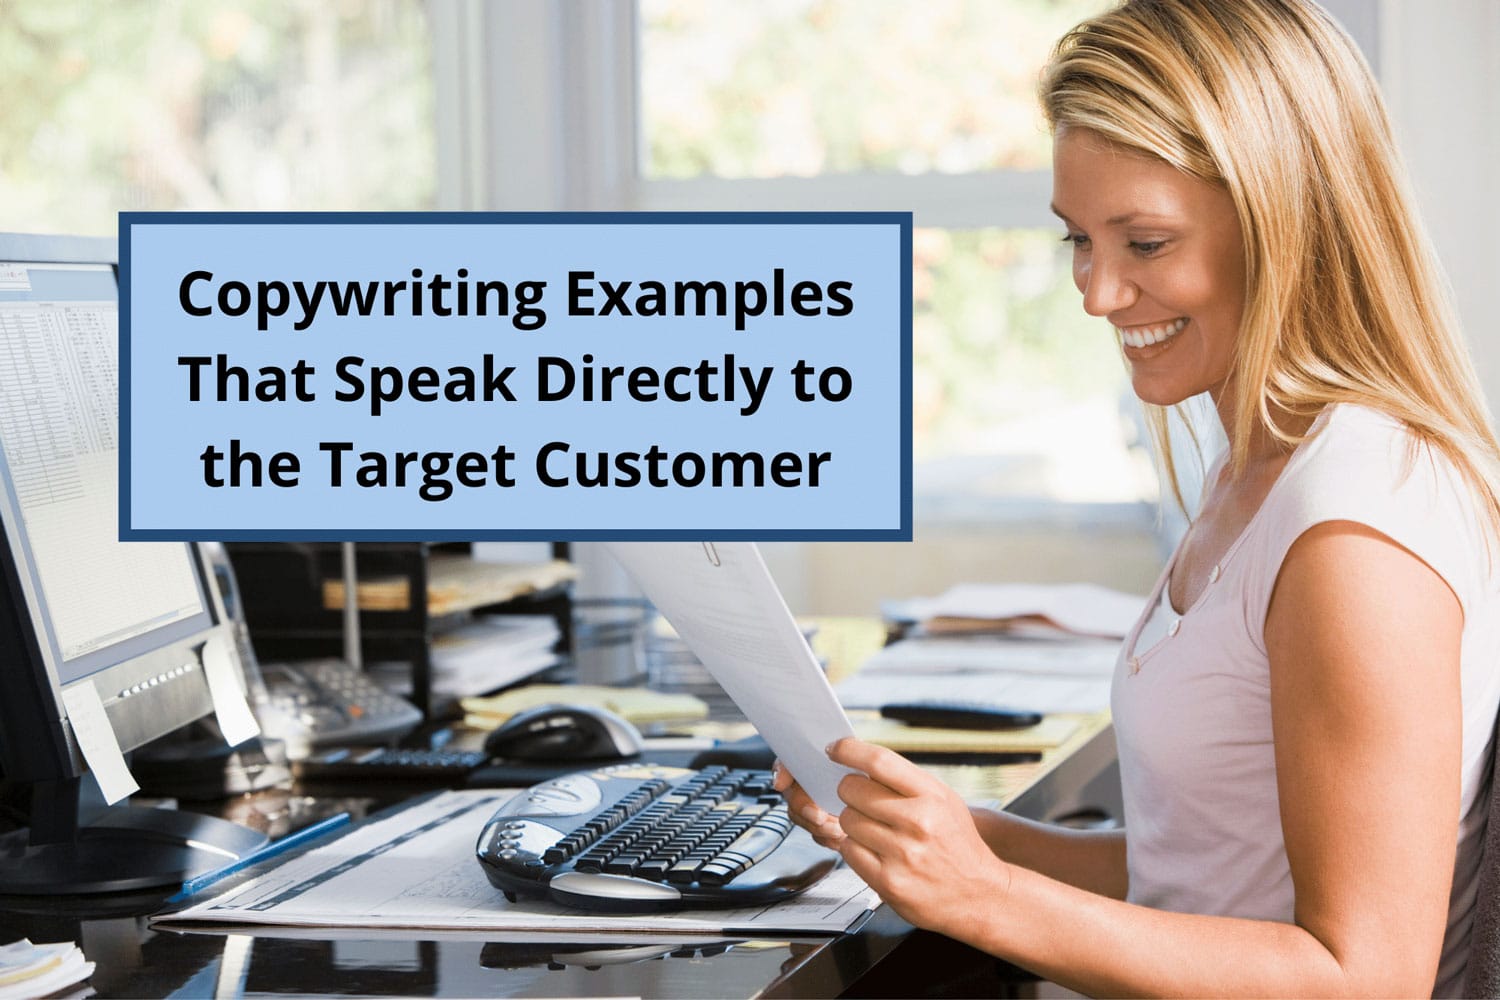 Copywriting Examples That Speak Directly to the Target Customer